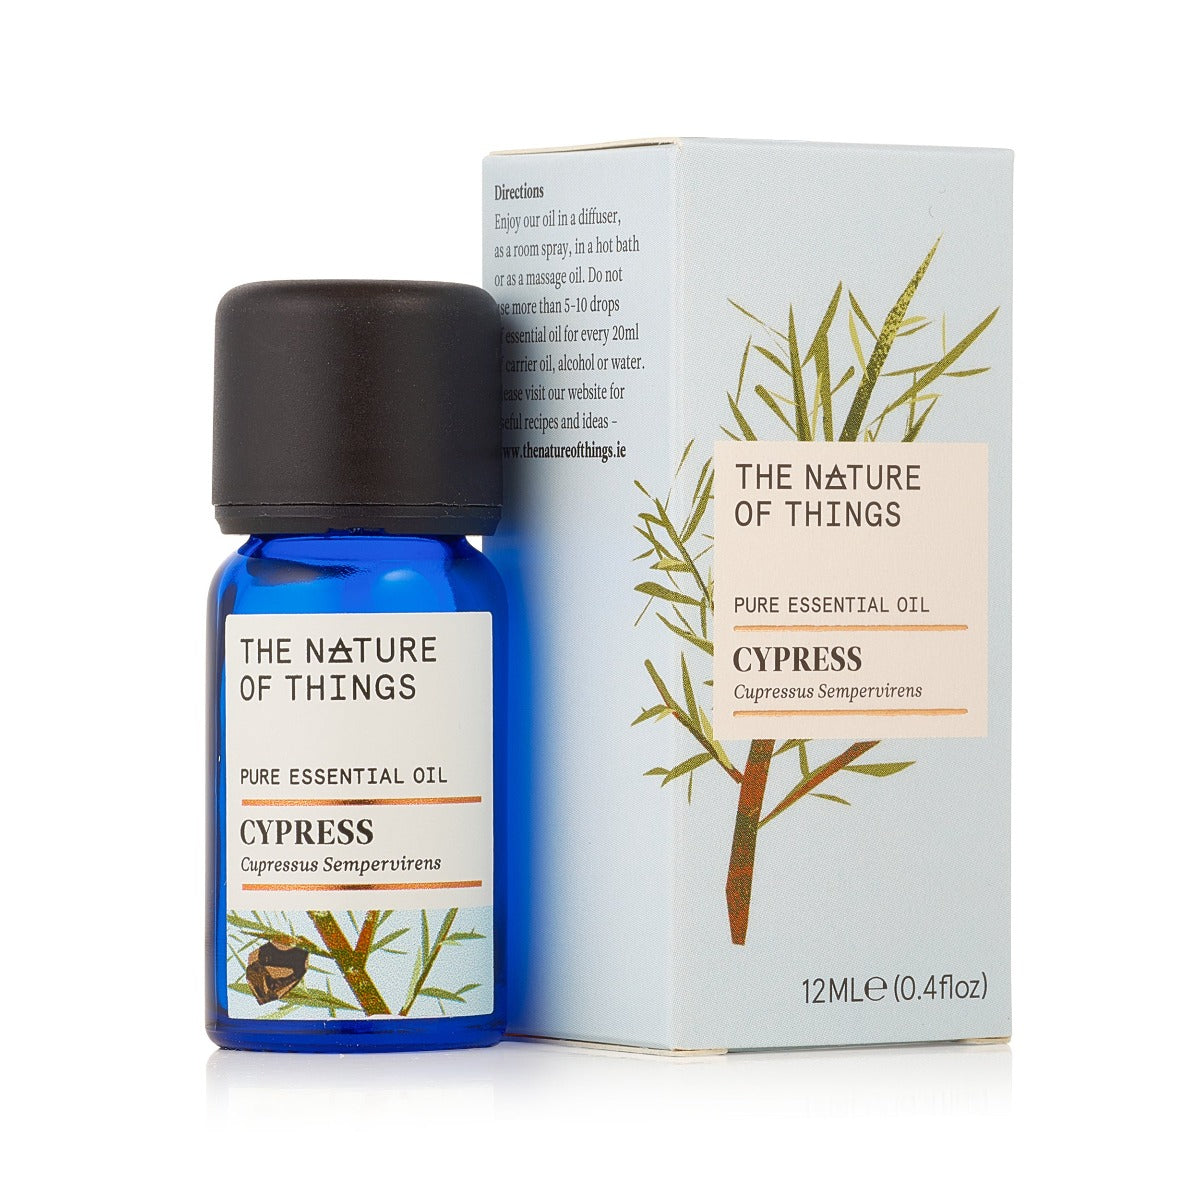 Organic Cypress Essential Oil from The Nature of Things